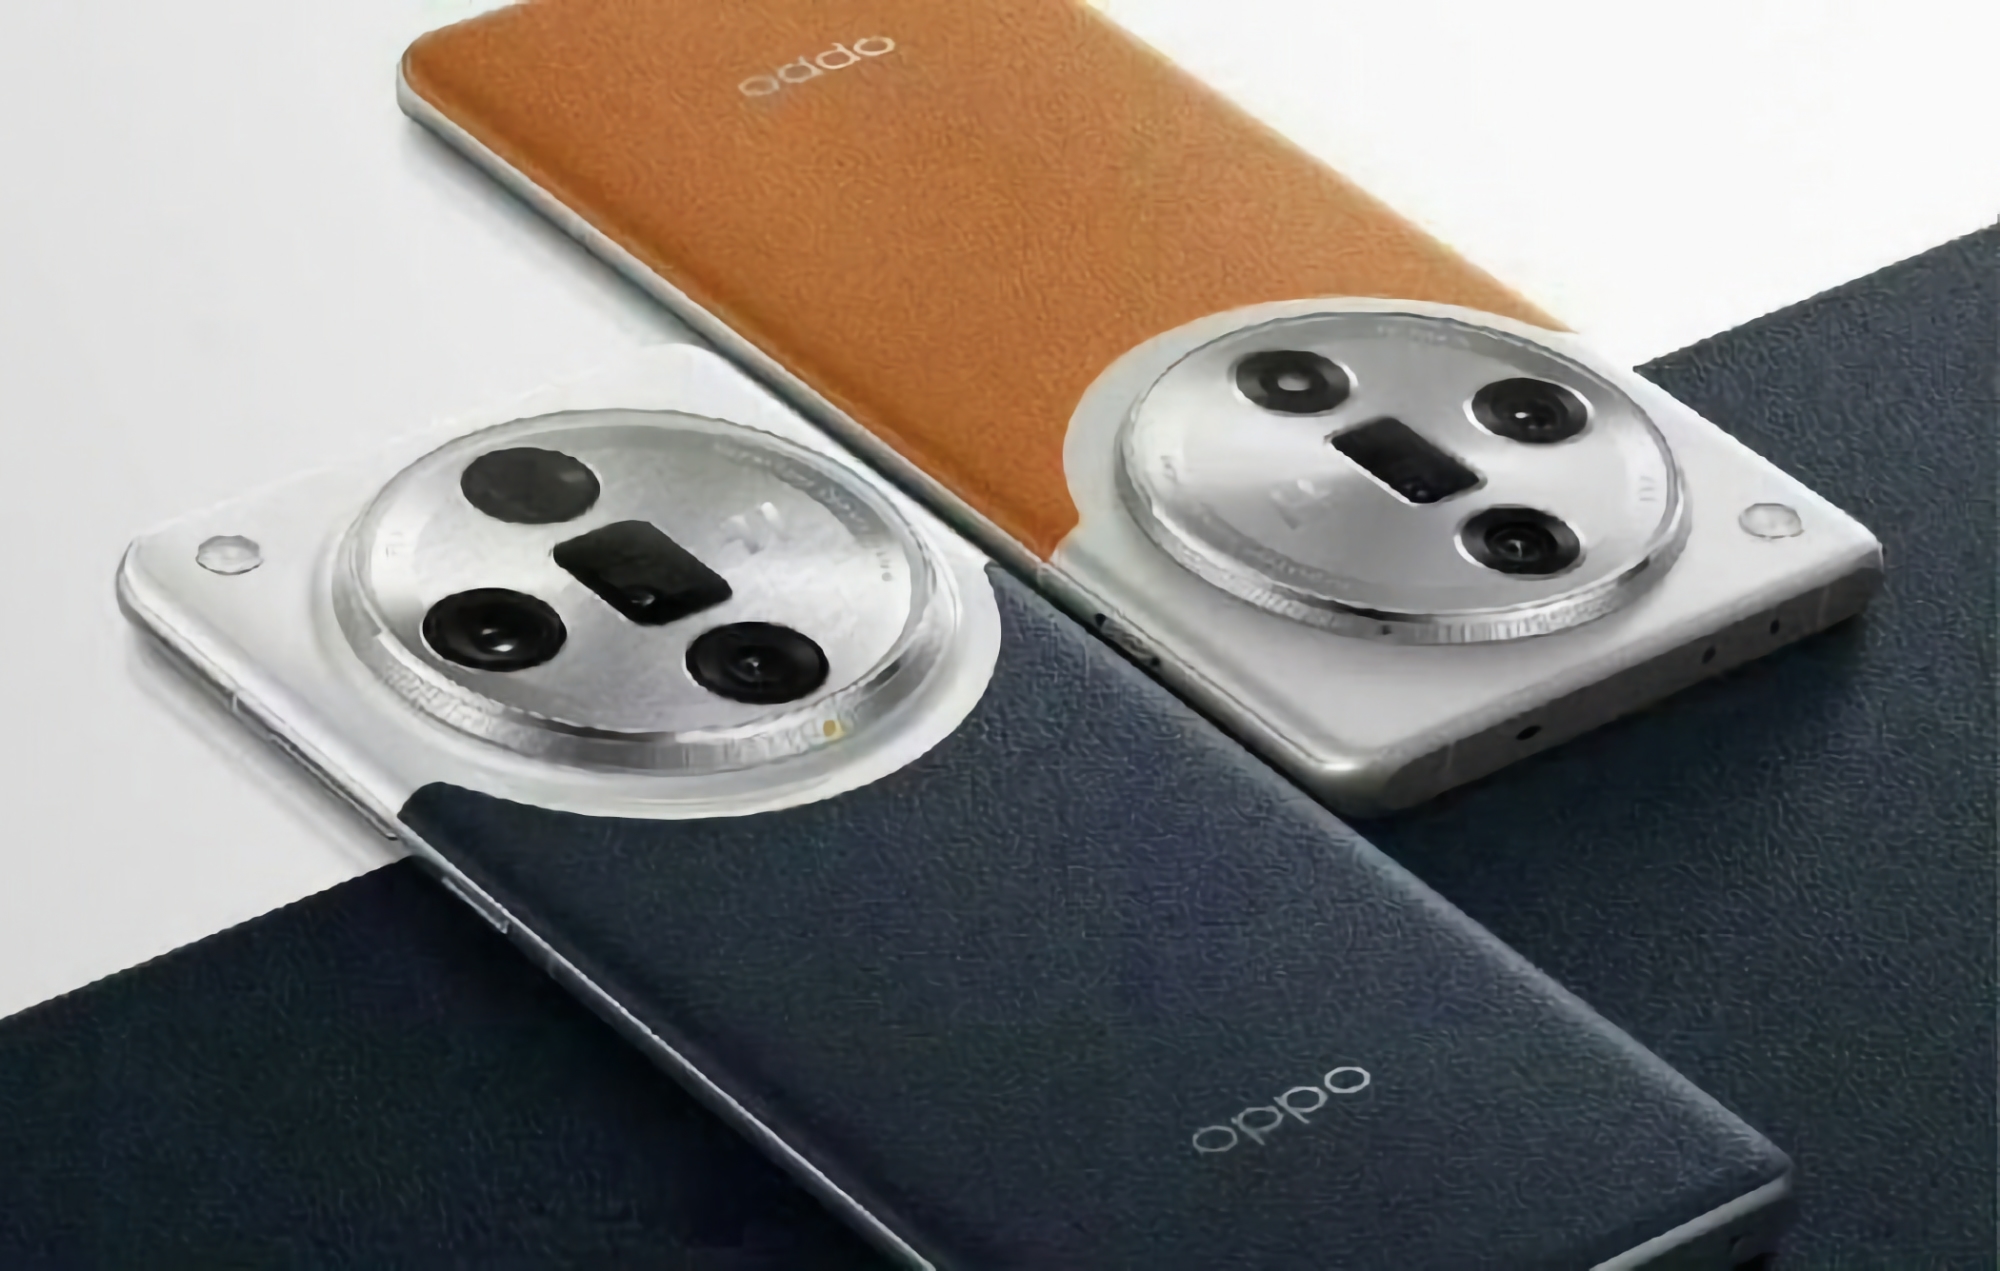 Find X7 and Find X7 Ultra: OPPO's new flagship smartphone line-up will feature two models